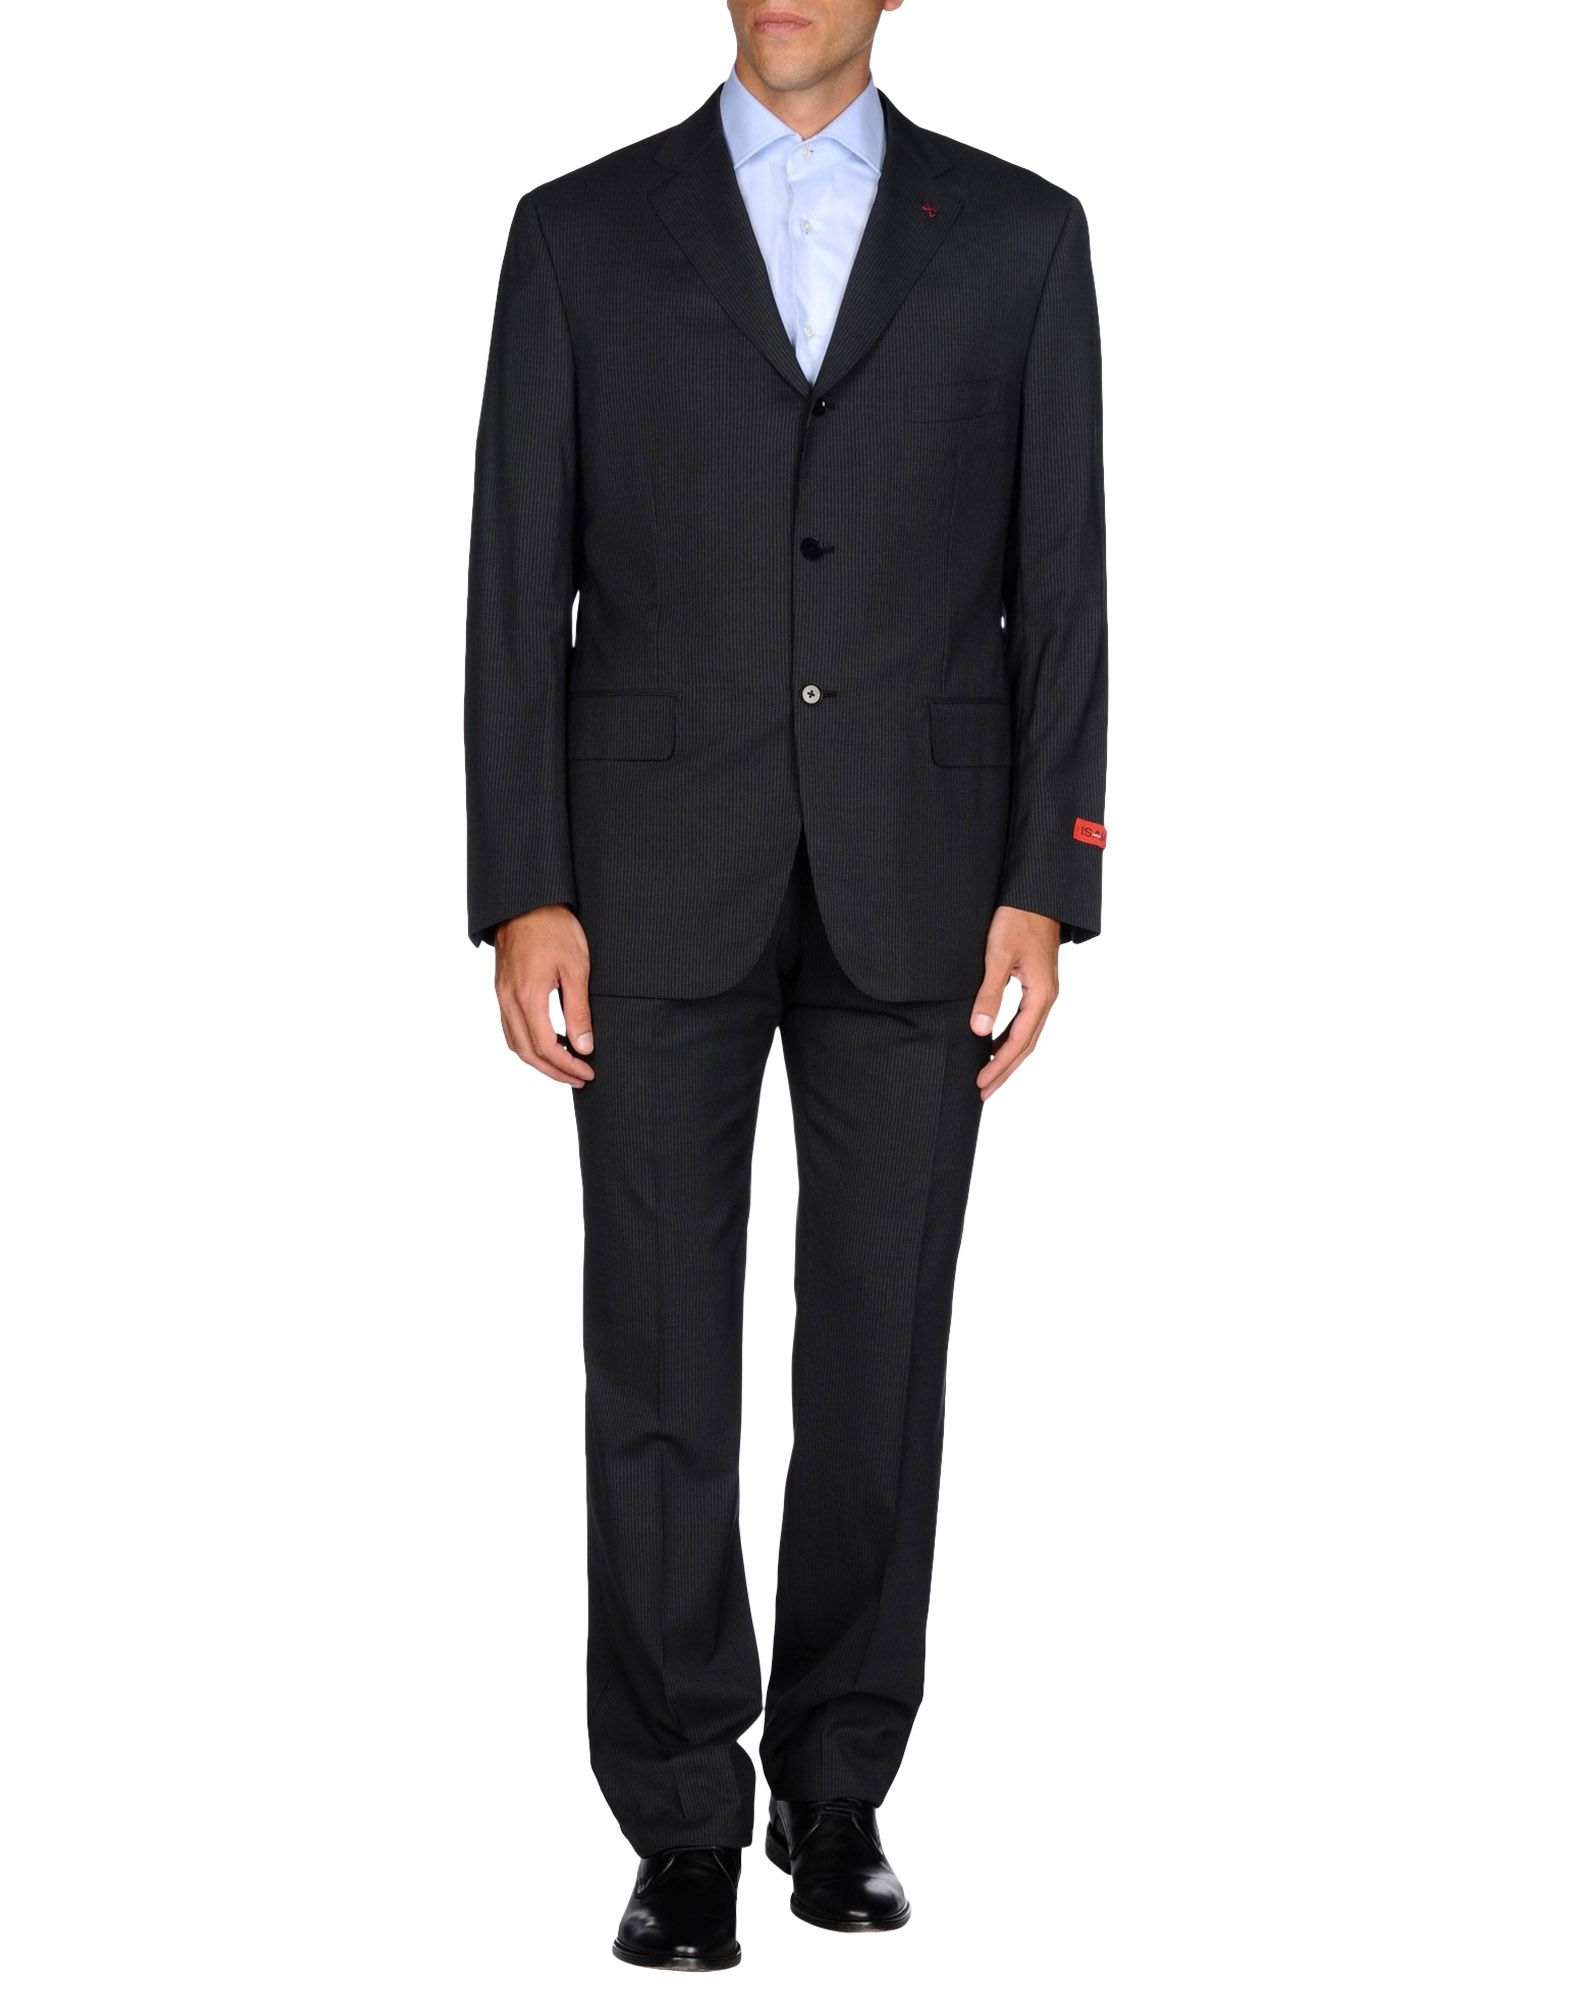 Isaia Suit in Black for Men - Lyst